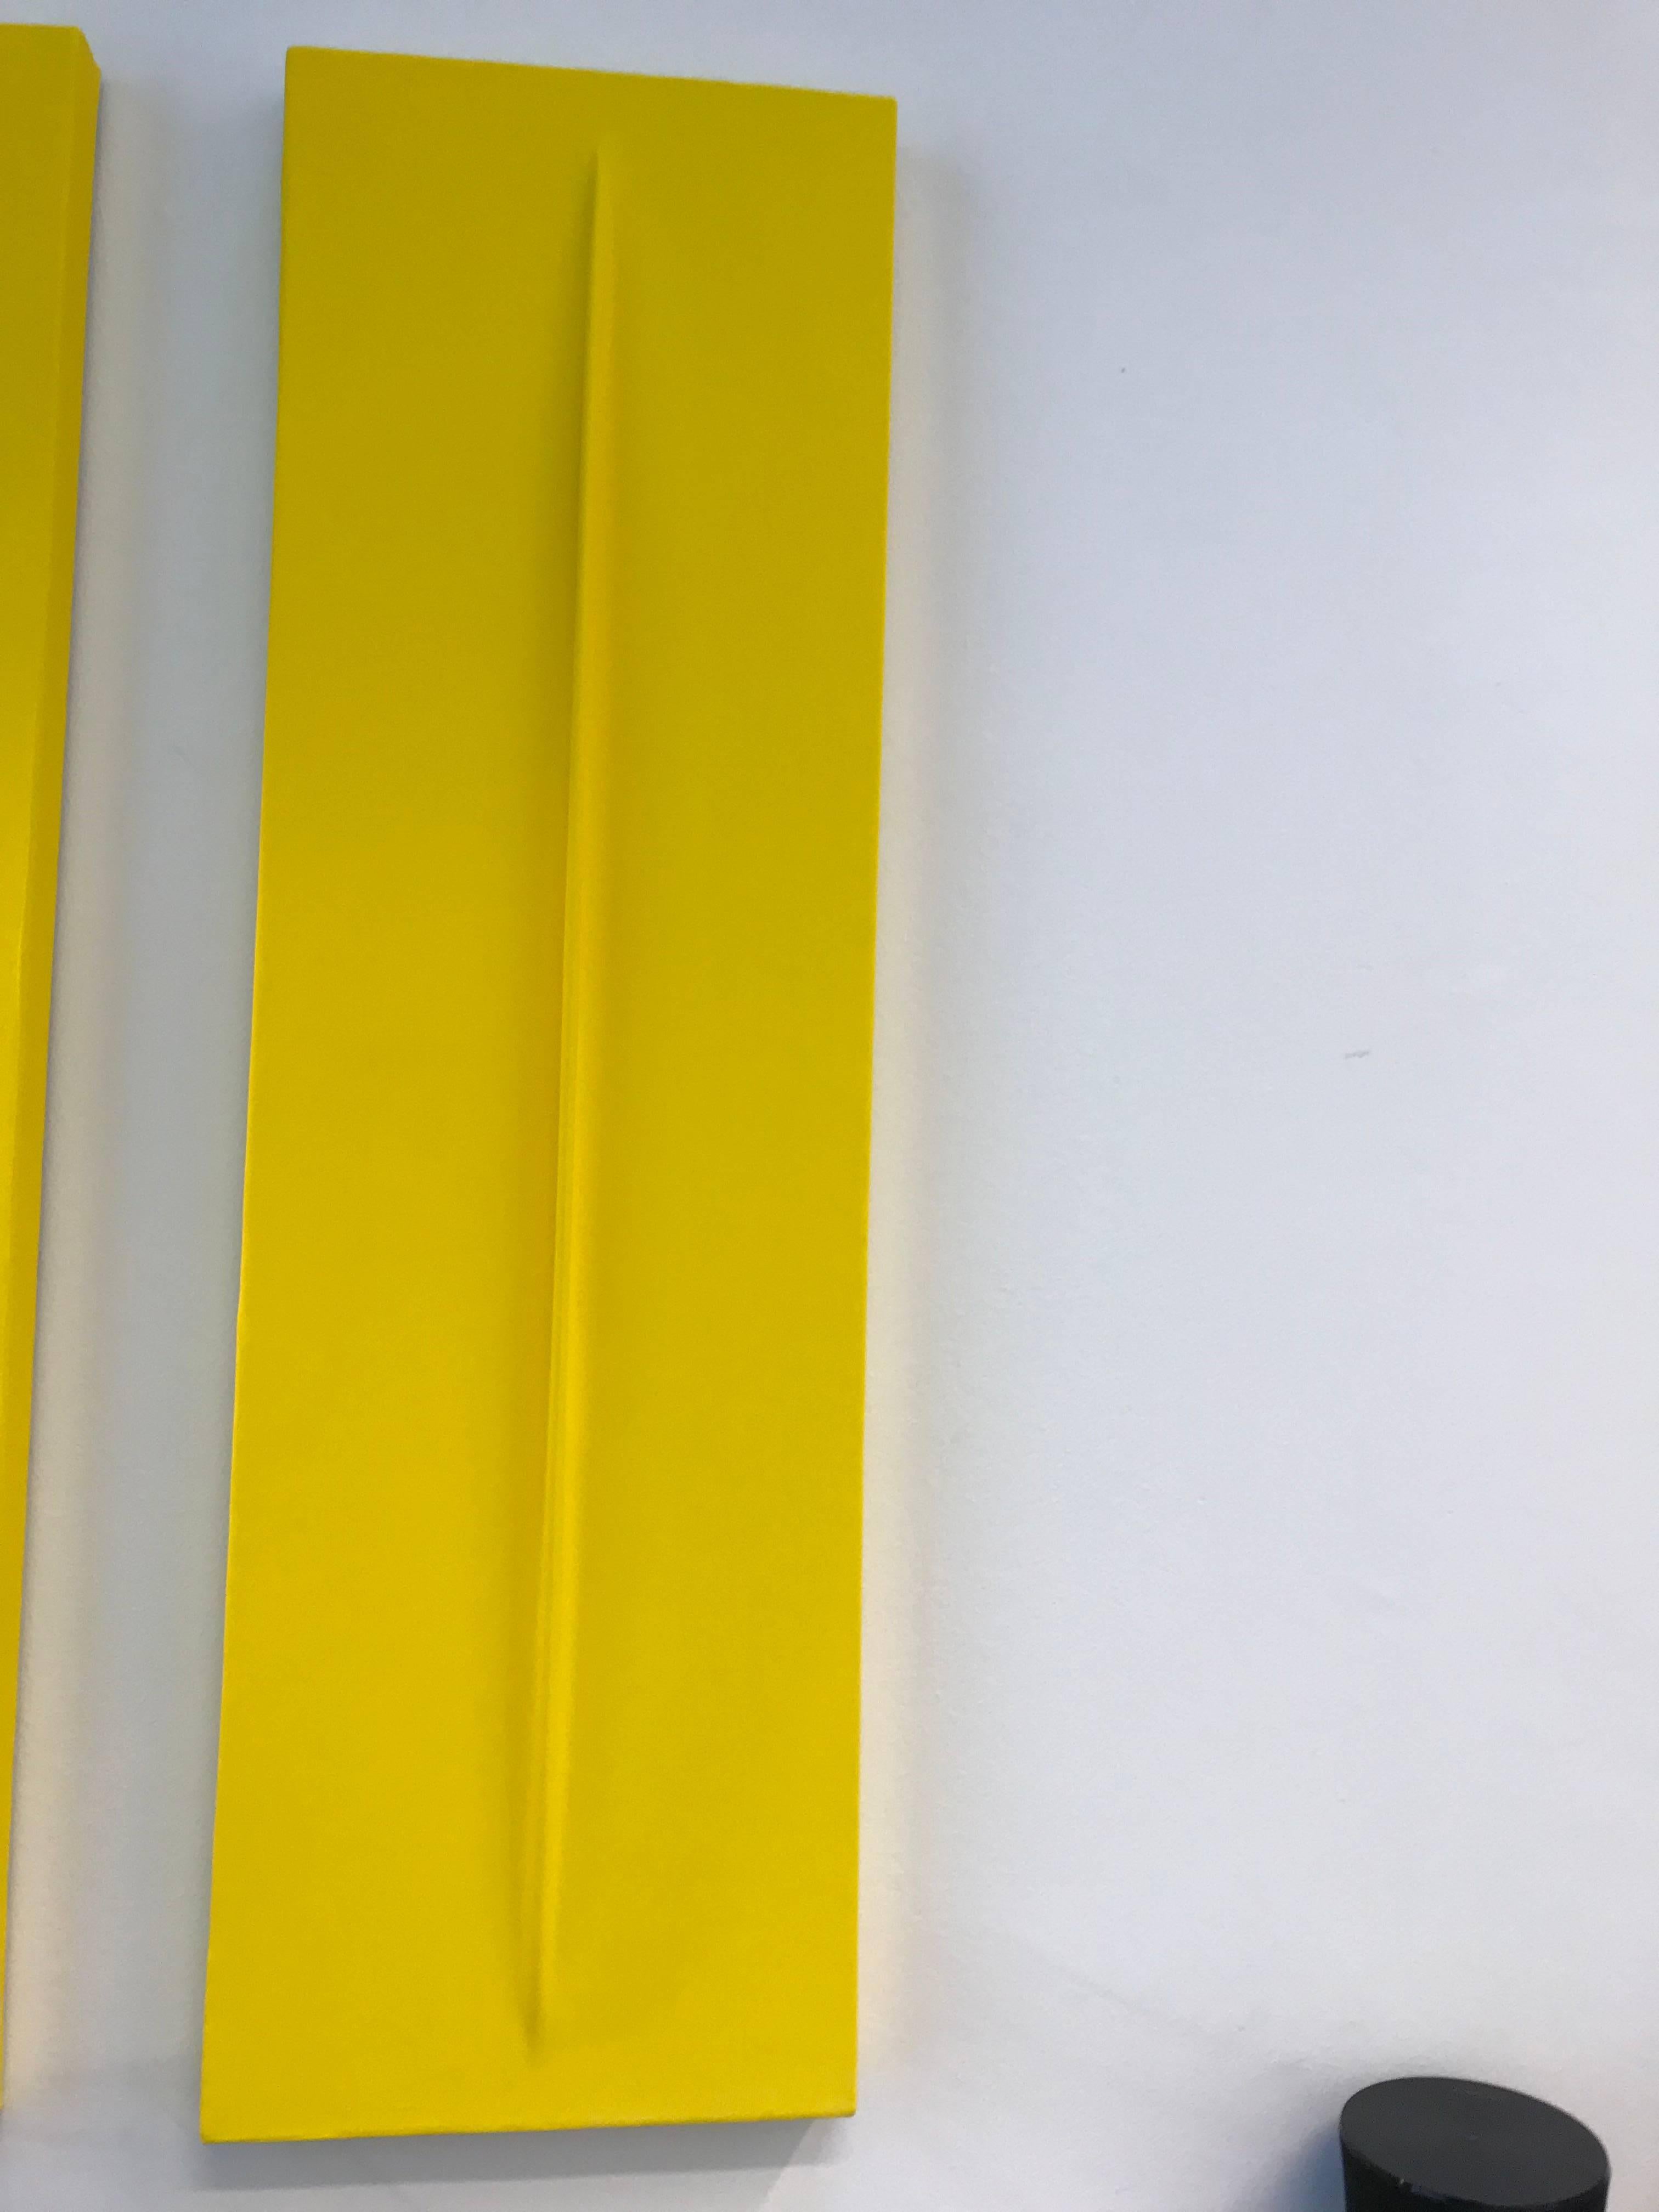 One Vertical Pleat Canvas with Yellow Pigment (One out of a serie of two )